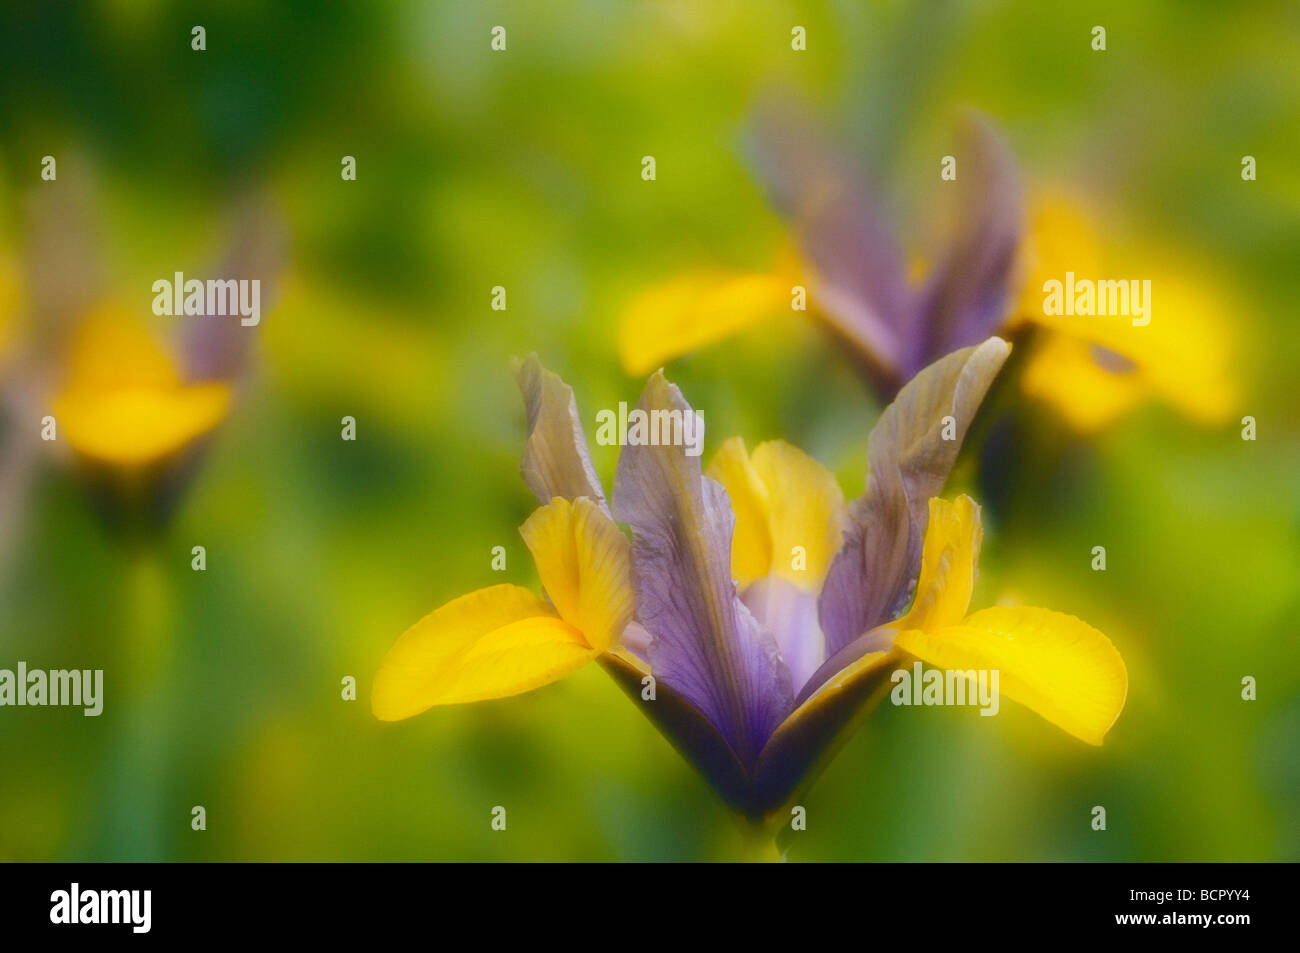 Iris danfordiae, Dwarf iris, Purple and yellow flowers isolated in shallow focus against a green background. Stock Photo